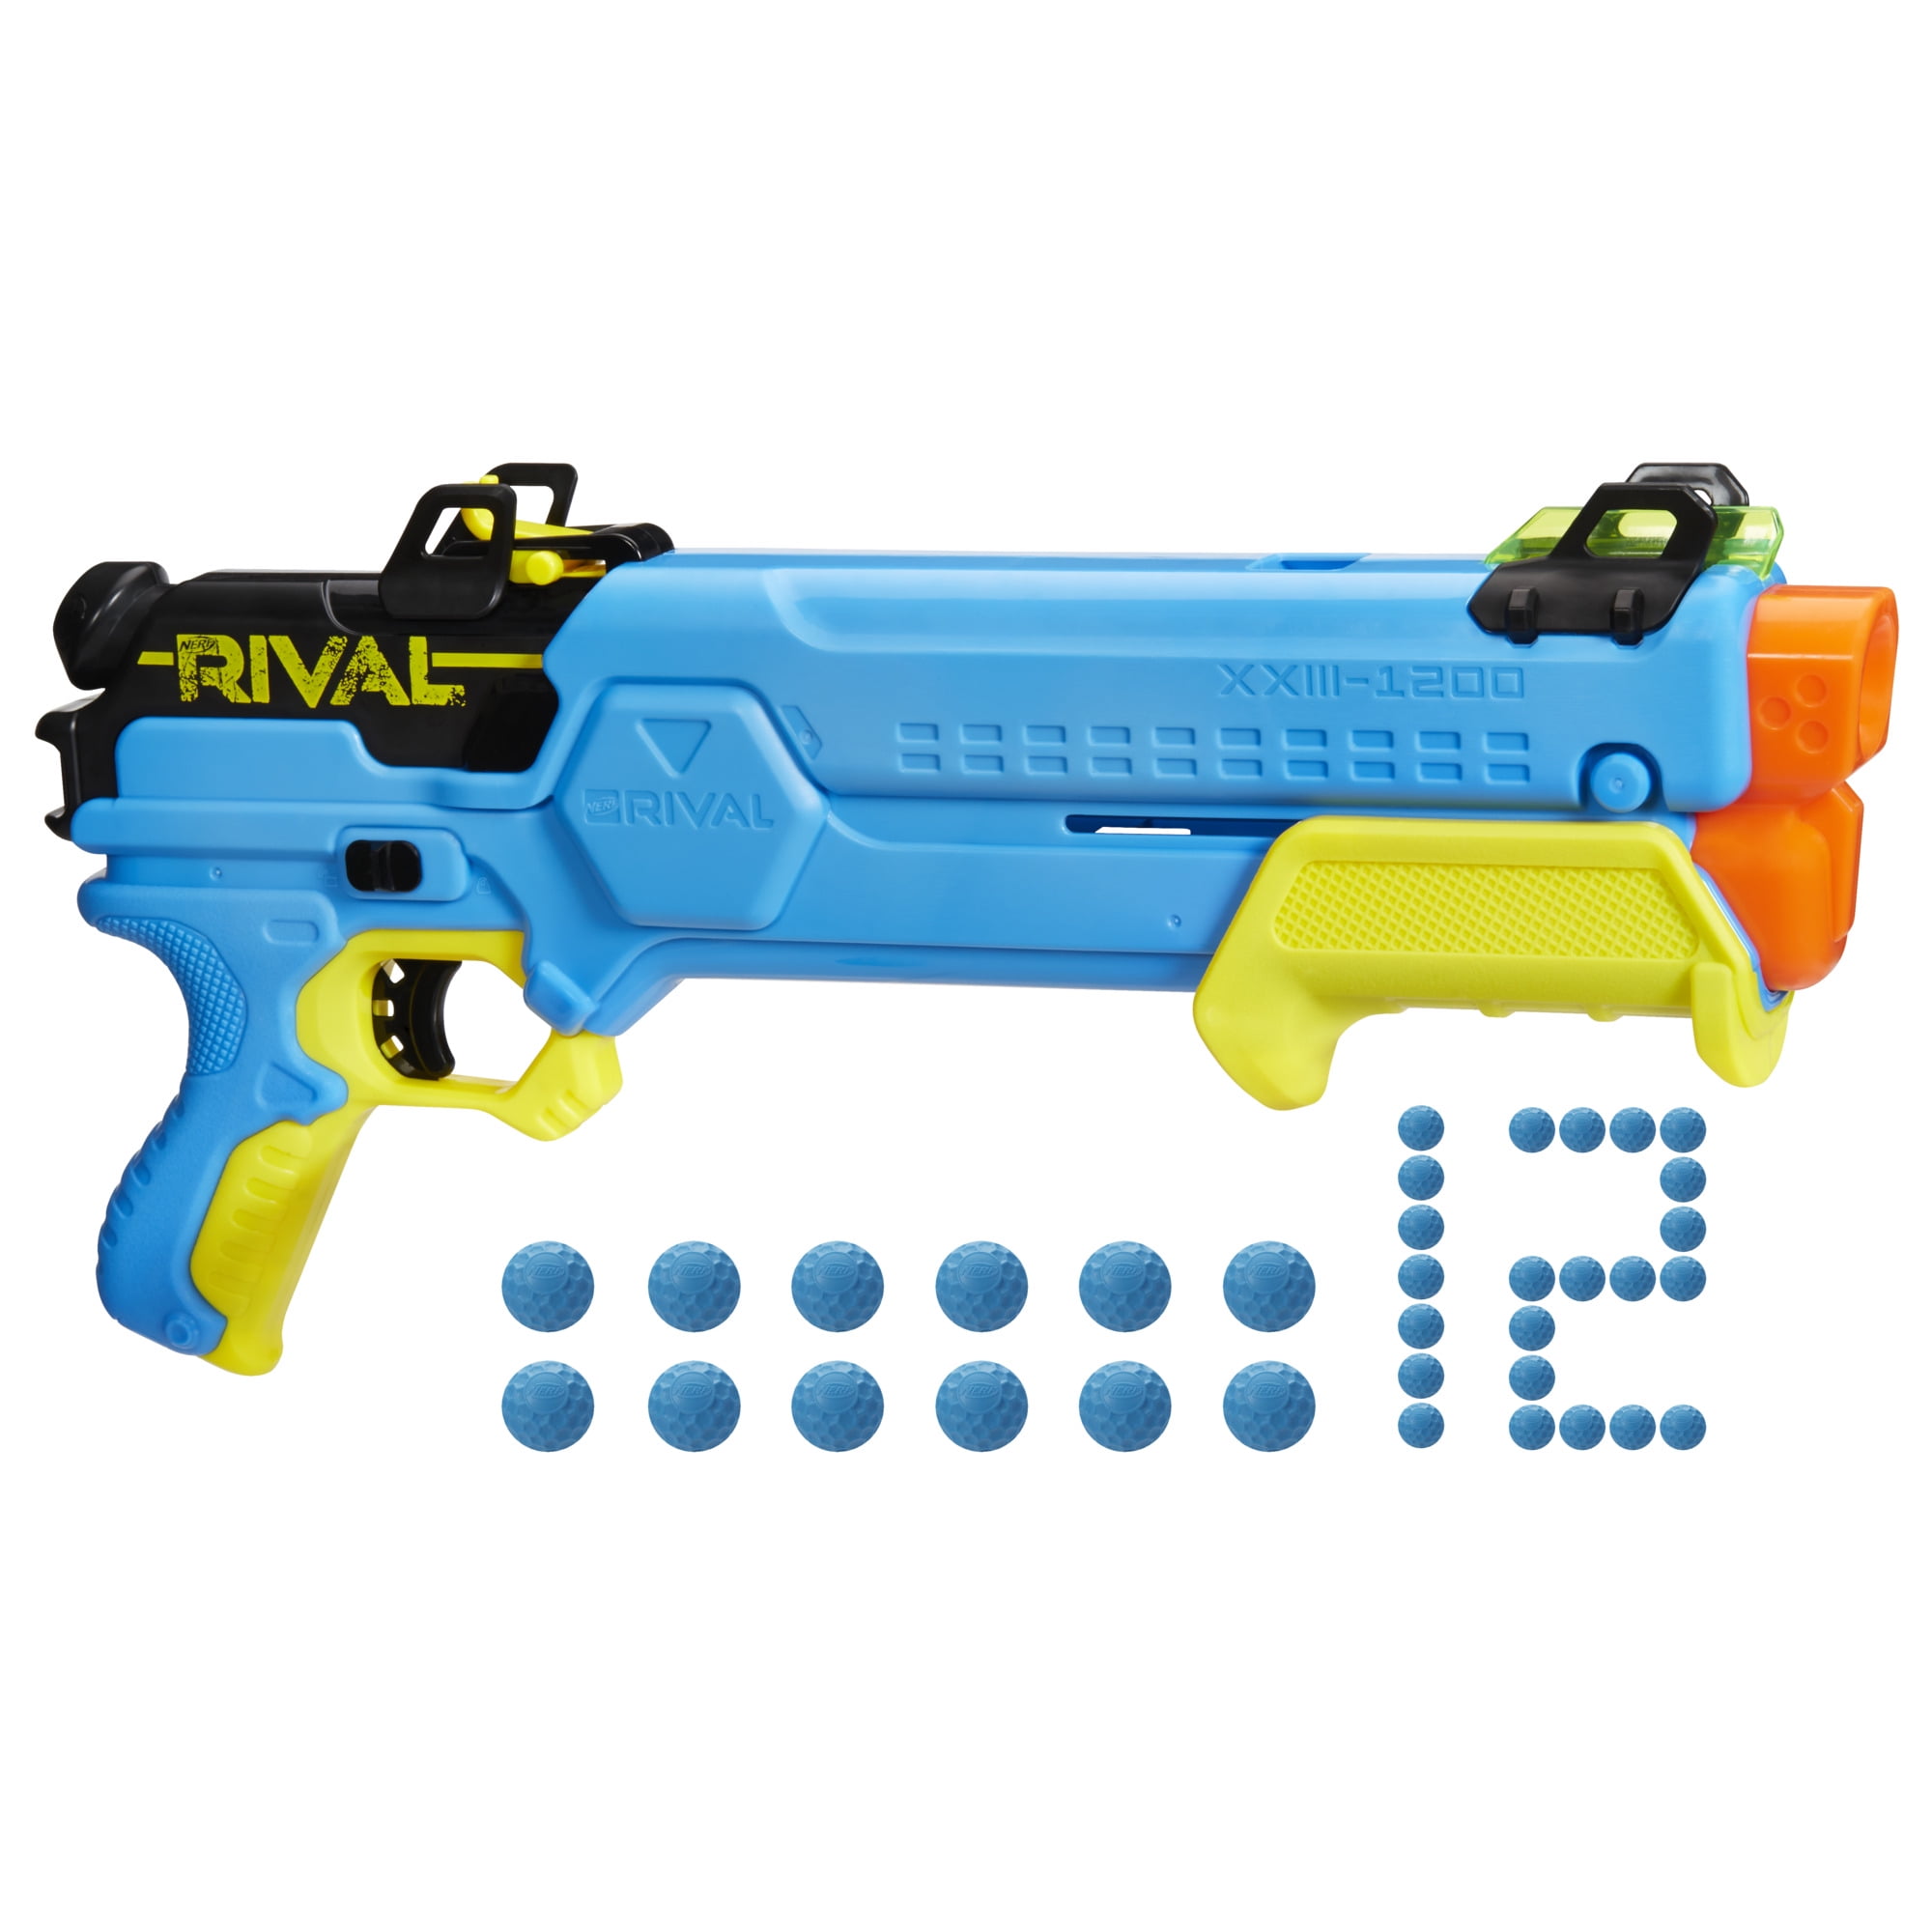 Nerf Rival Forerunner XXIII-1200 Nerf Blaster, 12 Round Capacity, 12 Nerf Rival Accu-Rounds, Adjustable Sight